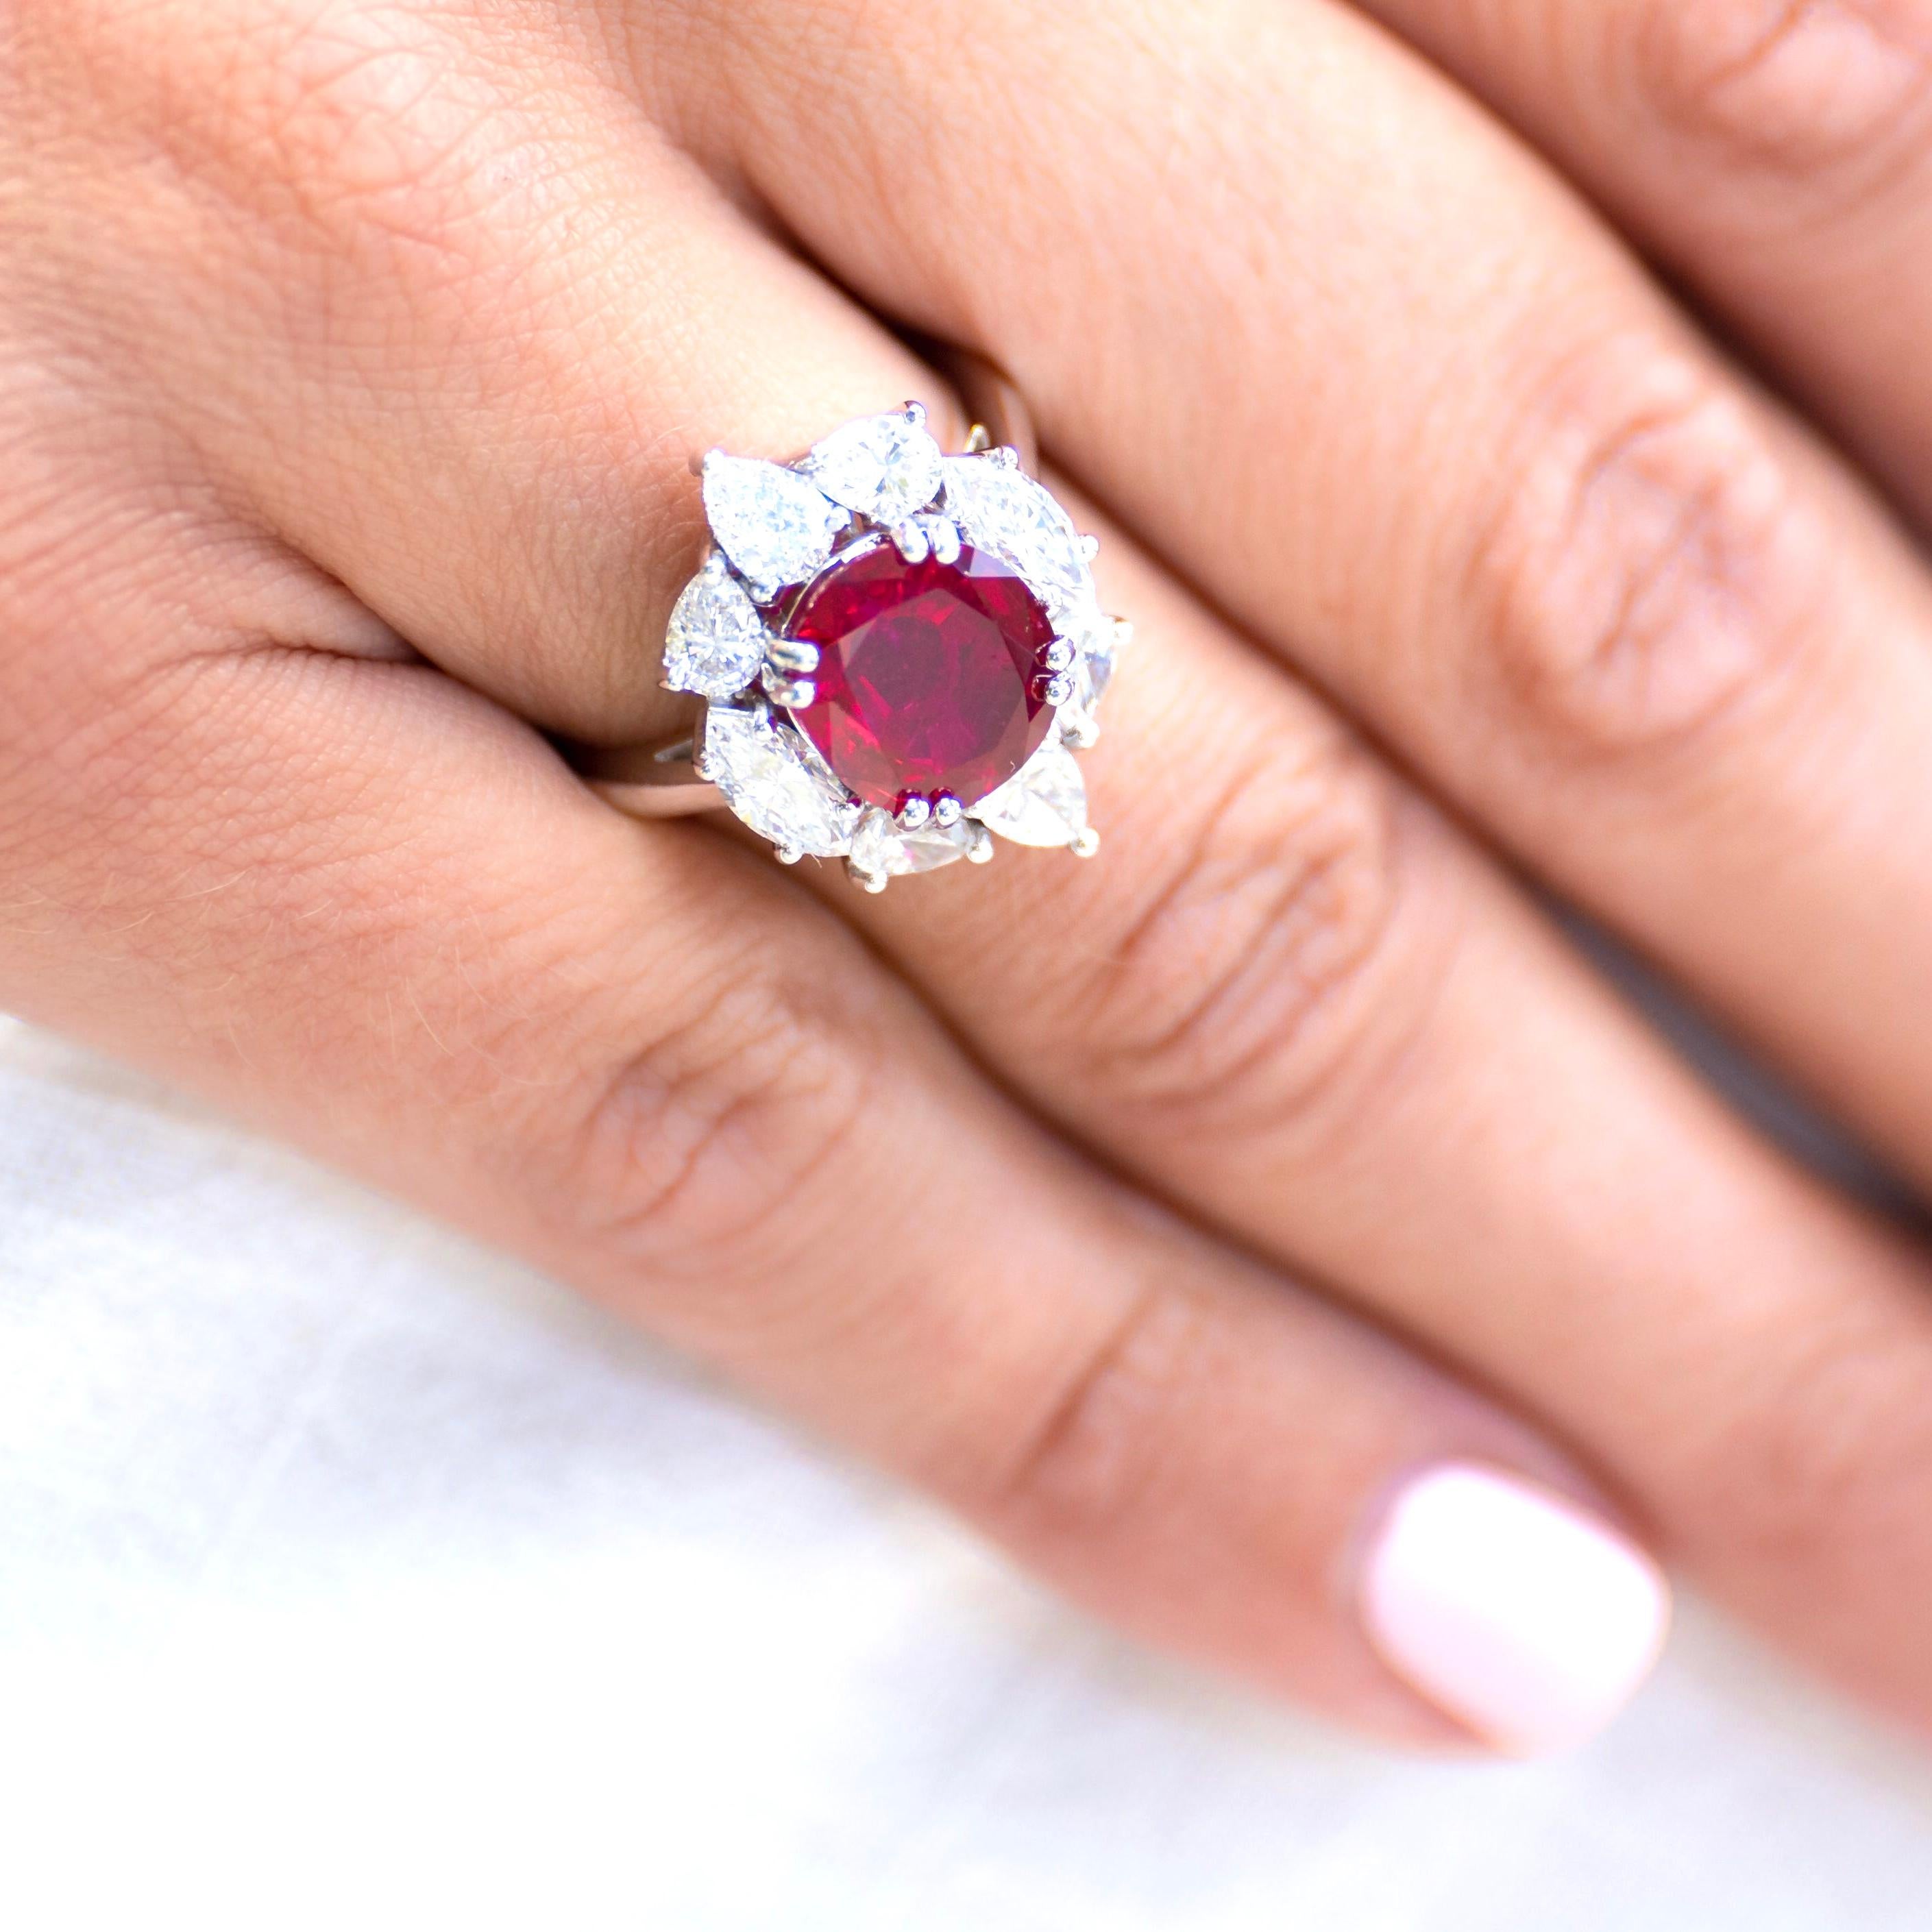 Cushion Cut 18 Carat White Gold, ‘Pigeon’s Blood’ 4.27 Carat Ruby and Diamond Cluster Ring